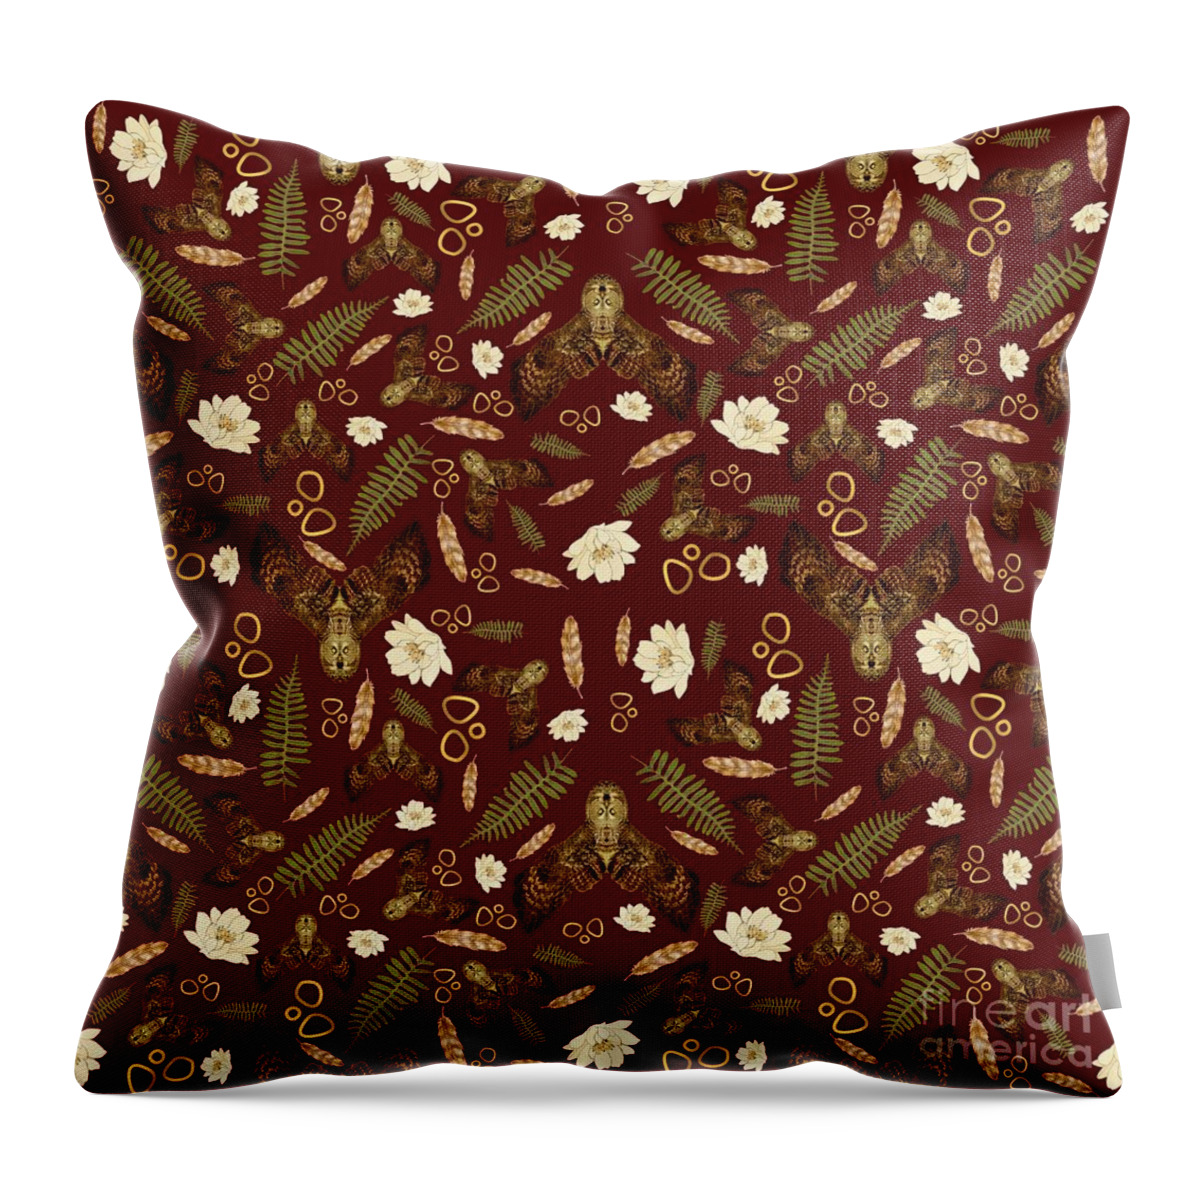 Great Gray Owl Throw Pillow featuring the photograph Great Gray Owl pattern in burgundy by Heather King